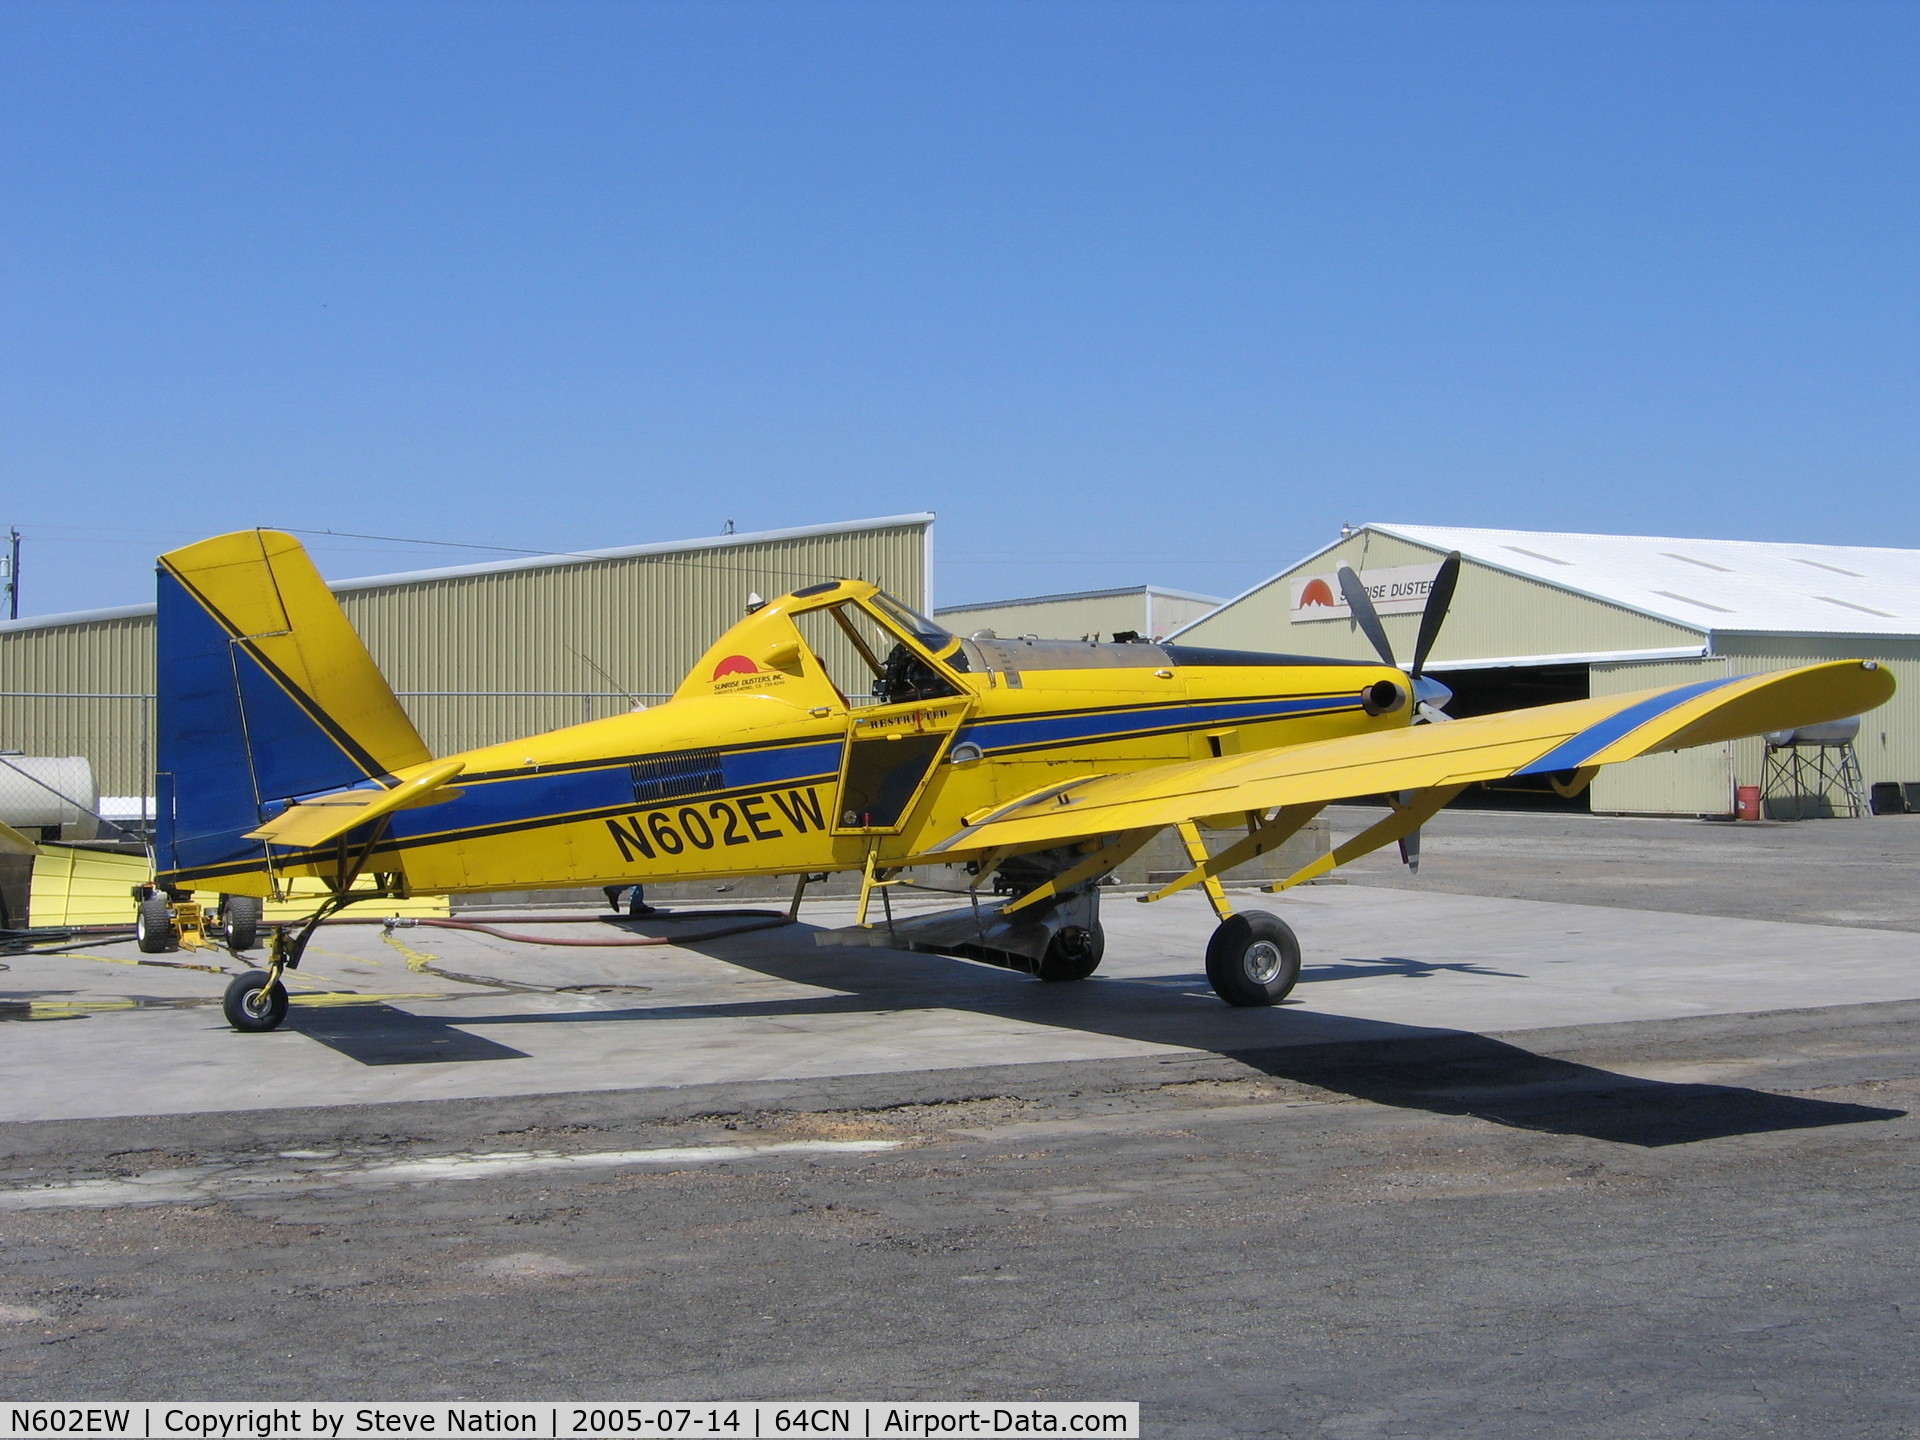 N602EW, 2000 Air Tractor Inc AT-602 C/N 602-0566, Sunrise Dusters 2000 Air Tractor AT-602 rigged for rice seeding at Knight's Landing, CA